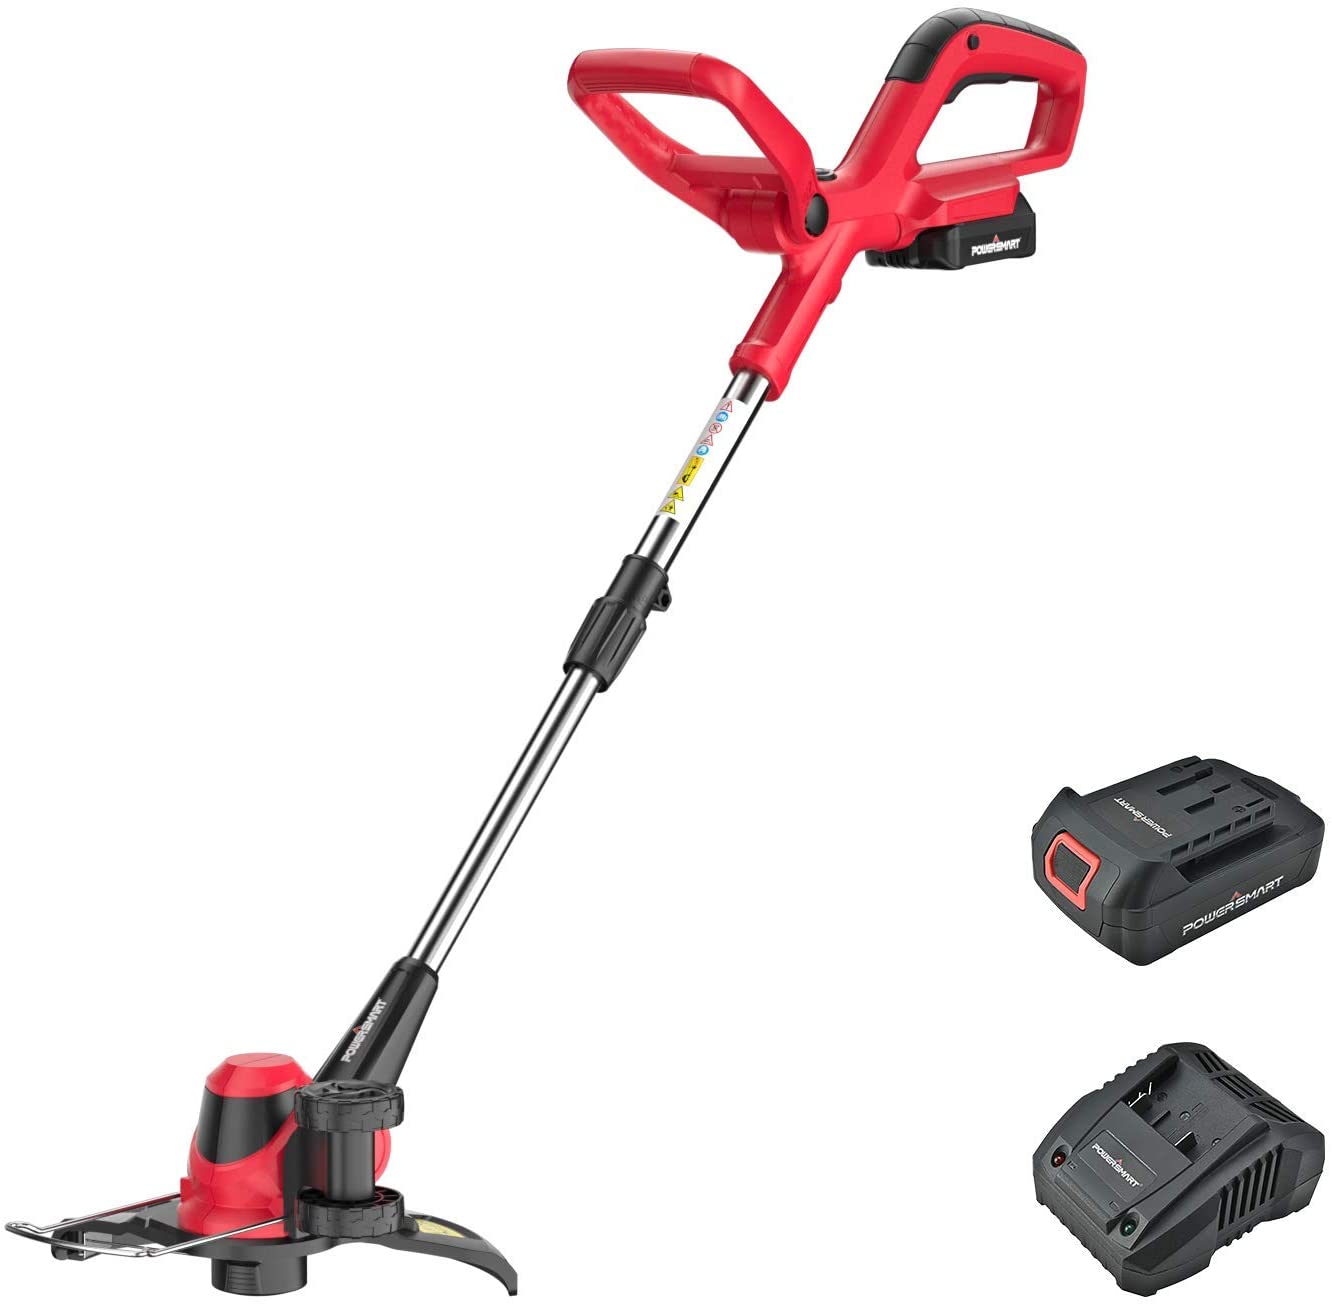 https://www.dontwasteyourmoney.com/wp-content/uploads/2020/10/powersmart-2-in-1-10-inch-20v-battery-powered-weed-wacker-battery-powered-weed-wacker.jpg